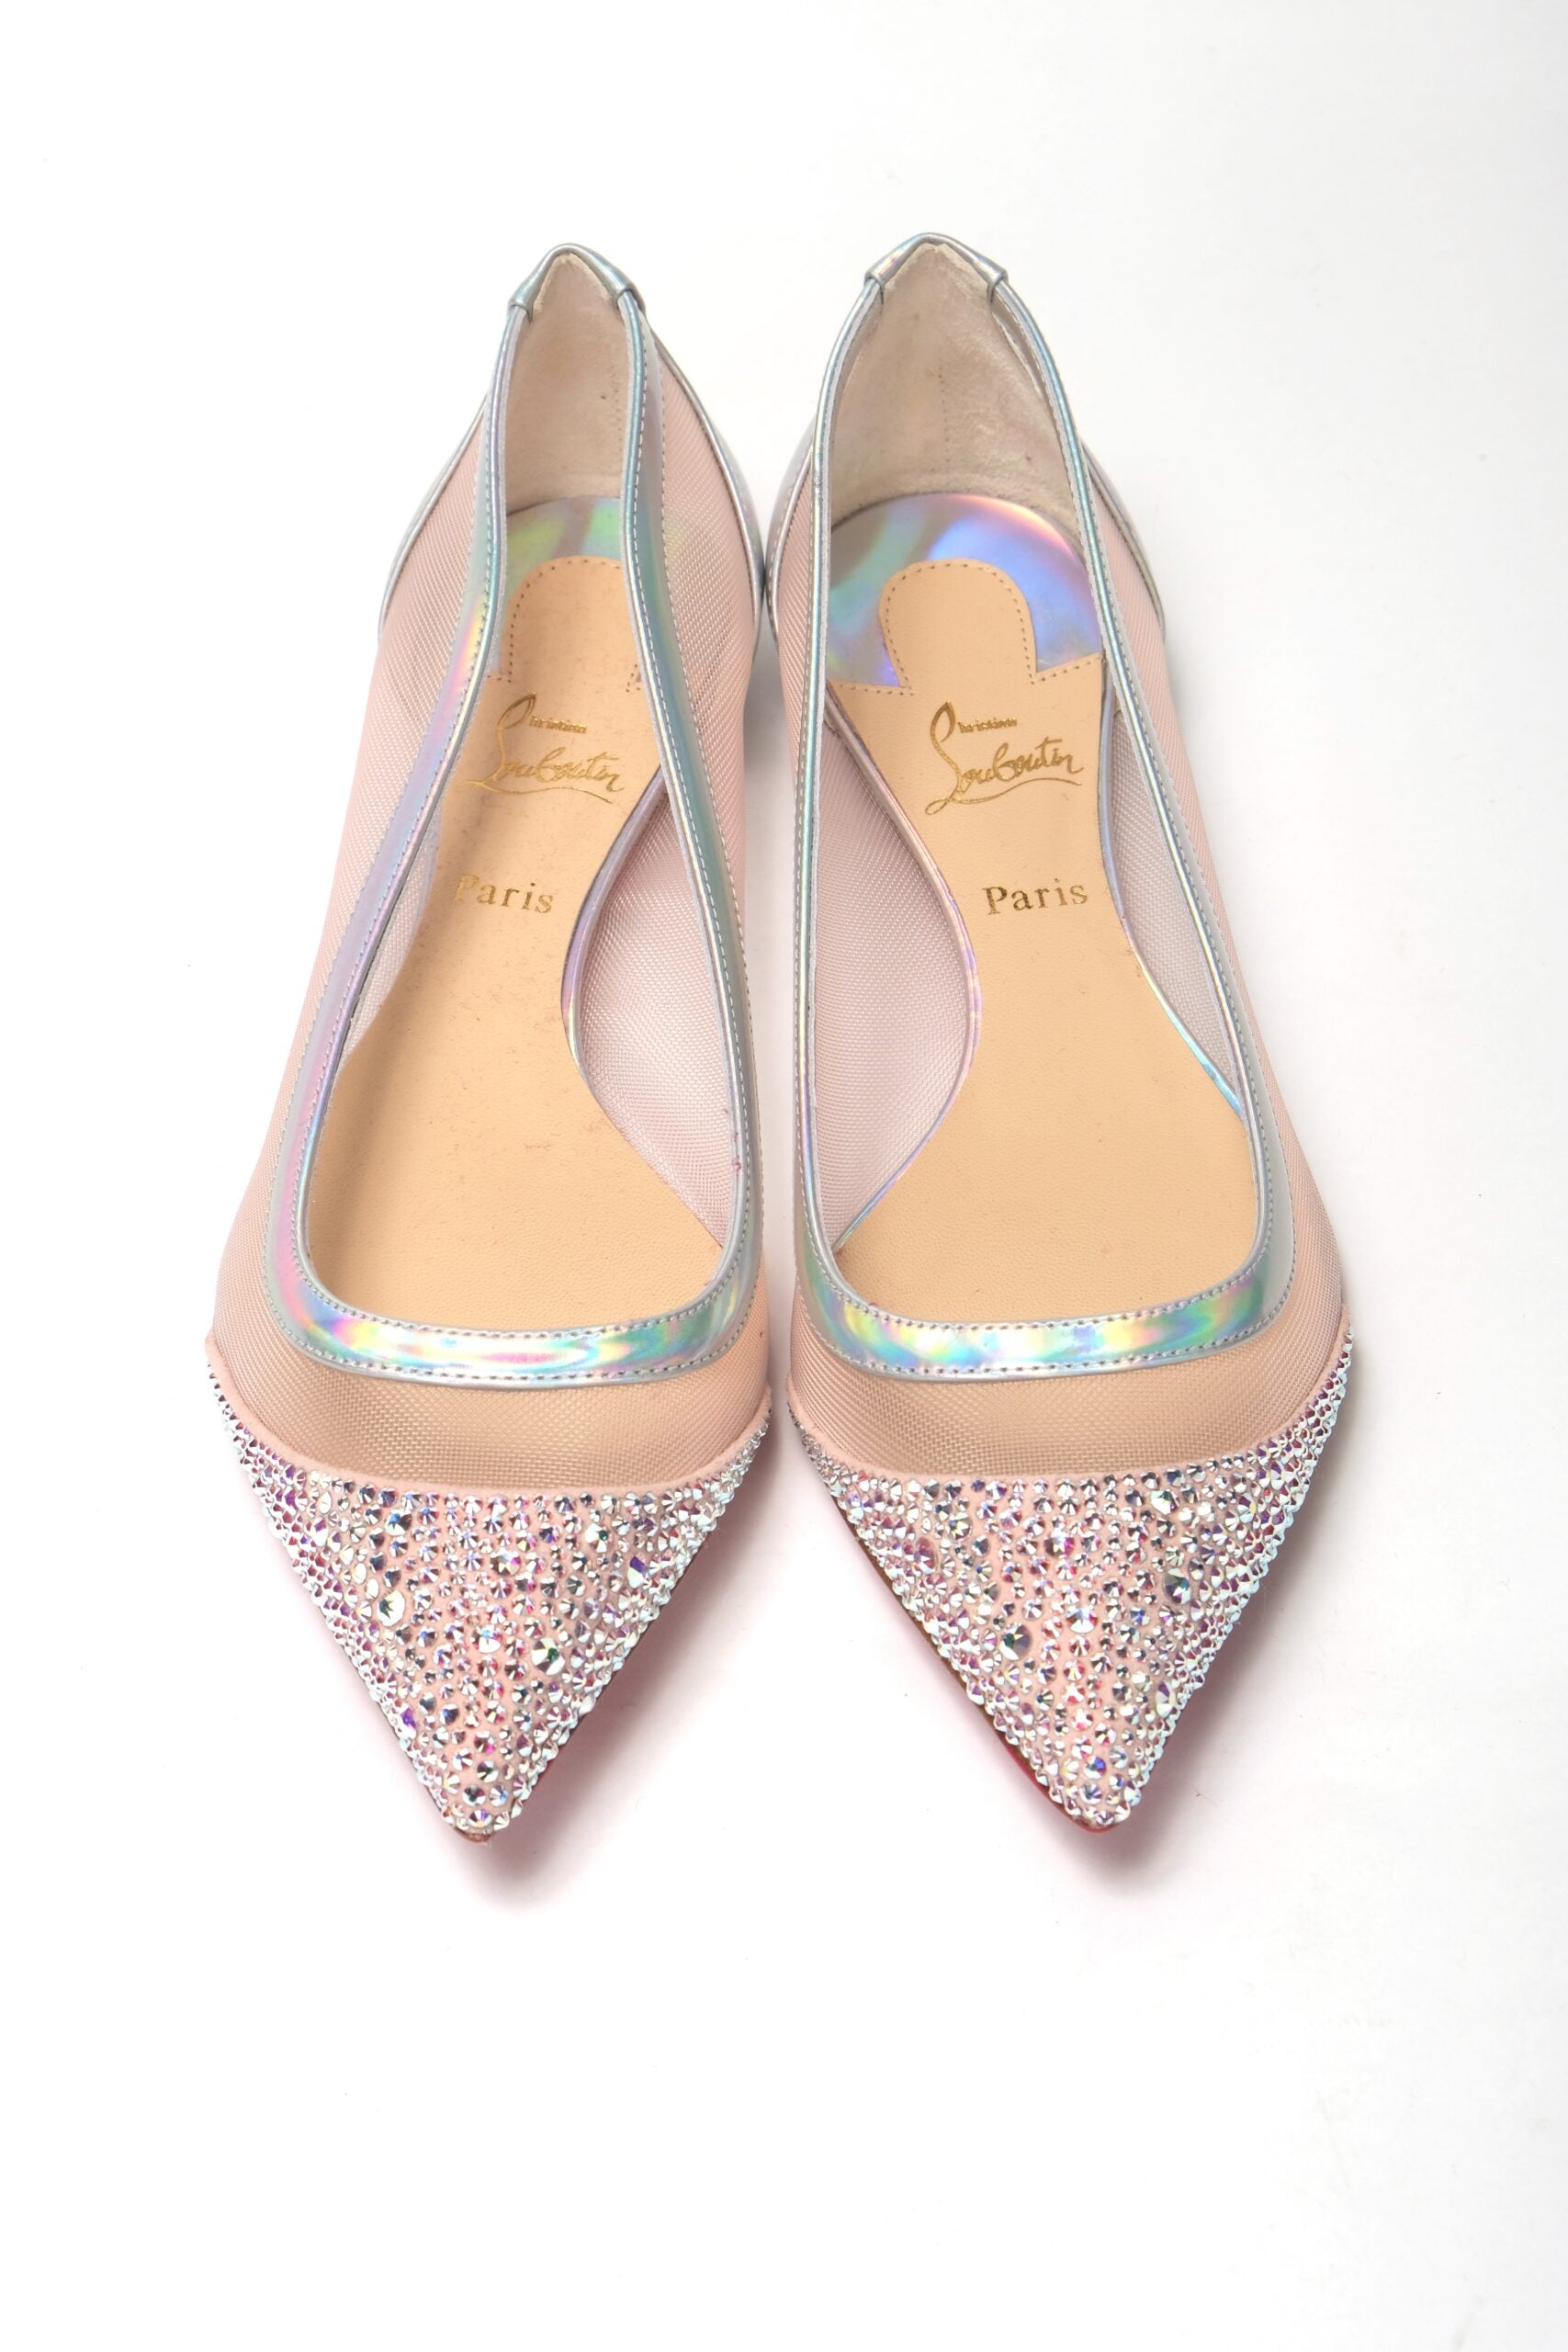 Christian Louboutin Silver Rose Flat Point Crystals Toe Shoe - Designed by Christian Louboutin Available to Buy at a Discounted Price on Moon Behind The Hill Online Designer Discount Store